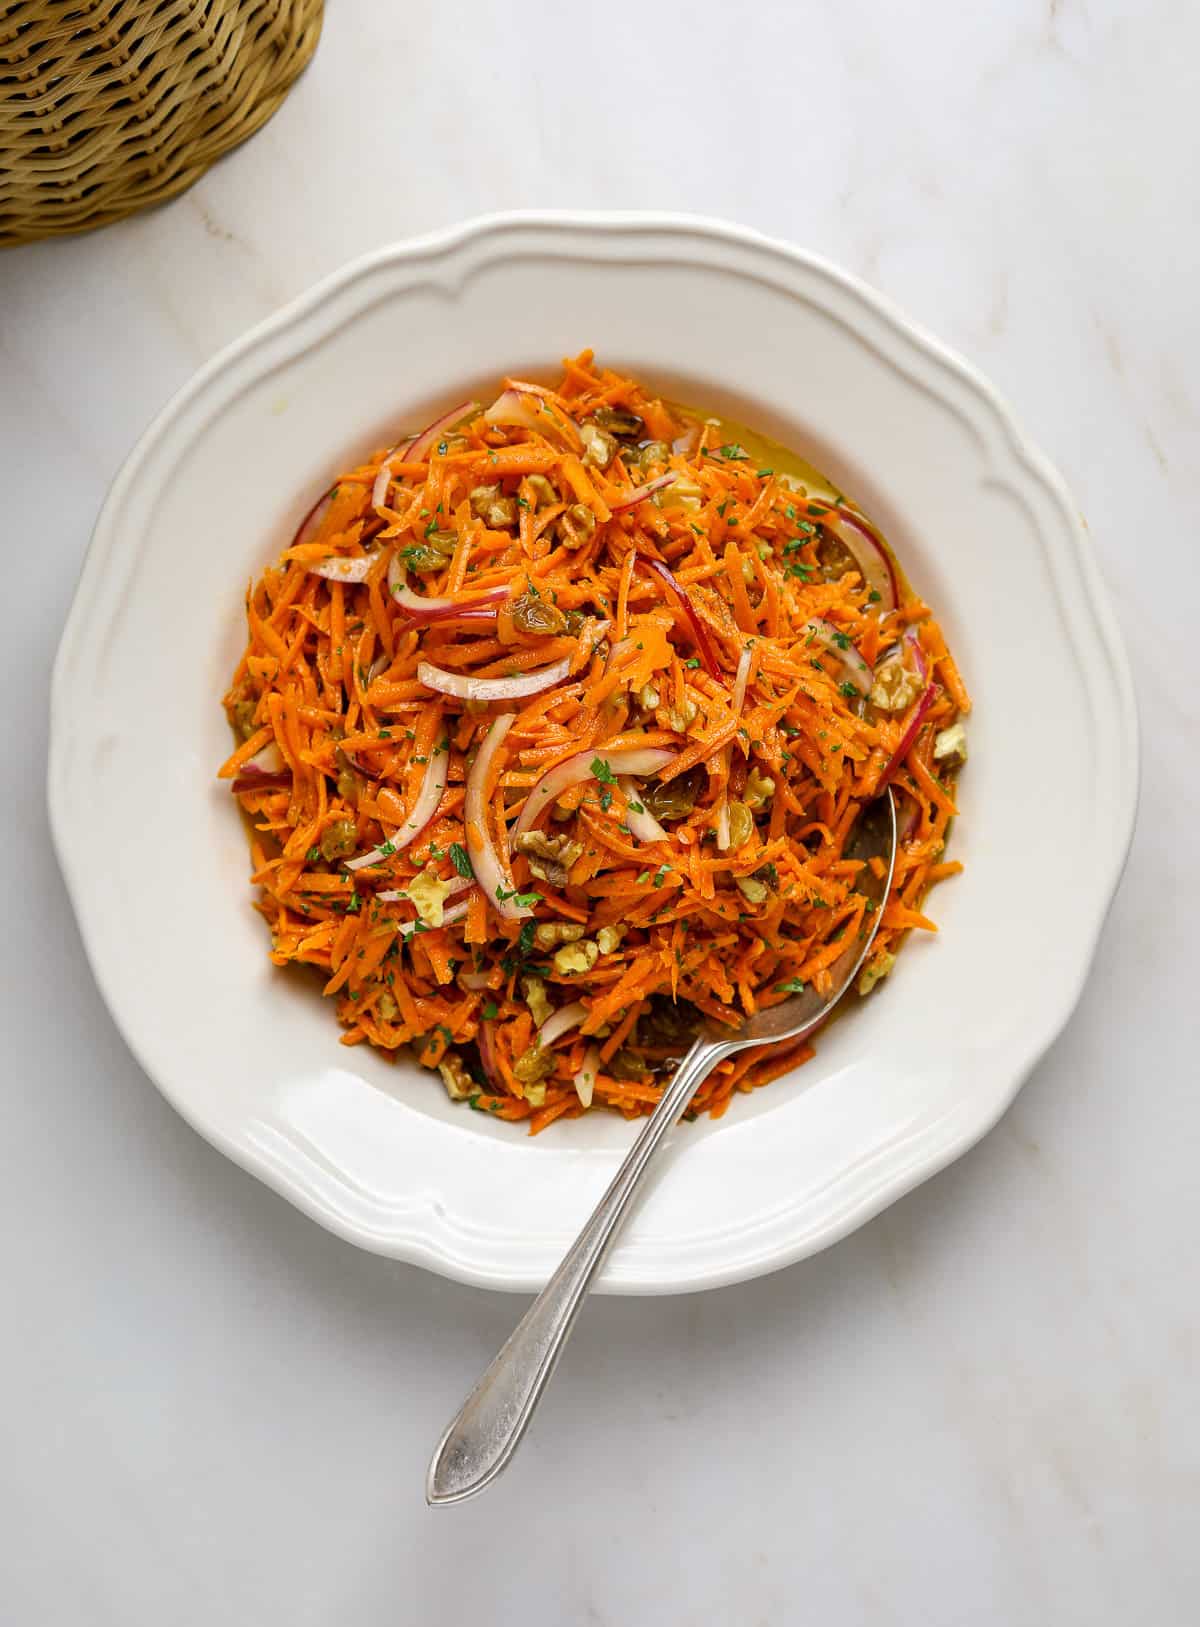 Grated Carrot Salad in a white bowl on a marble table.